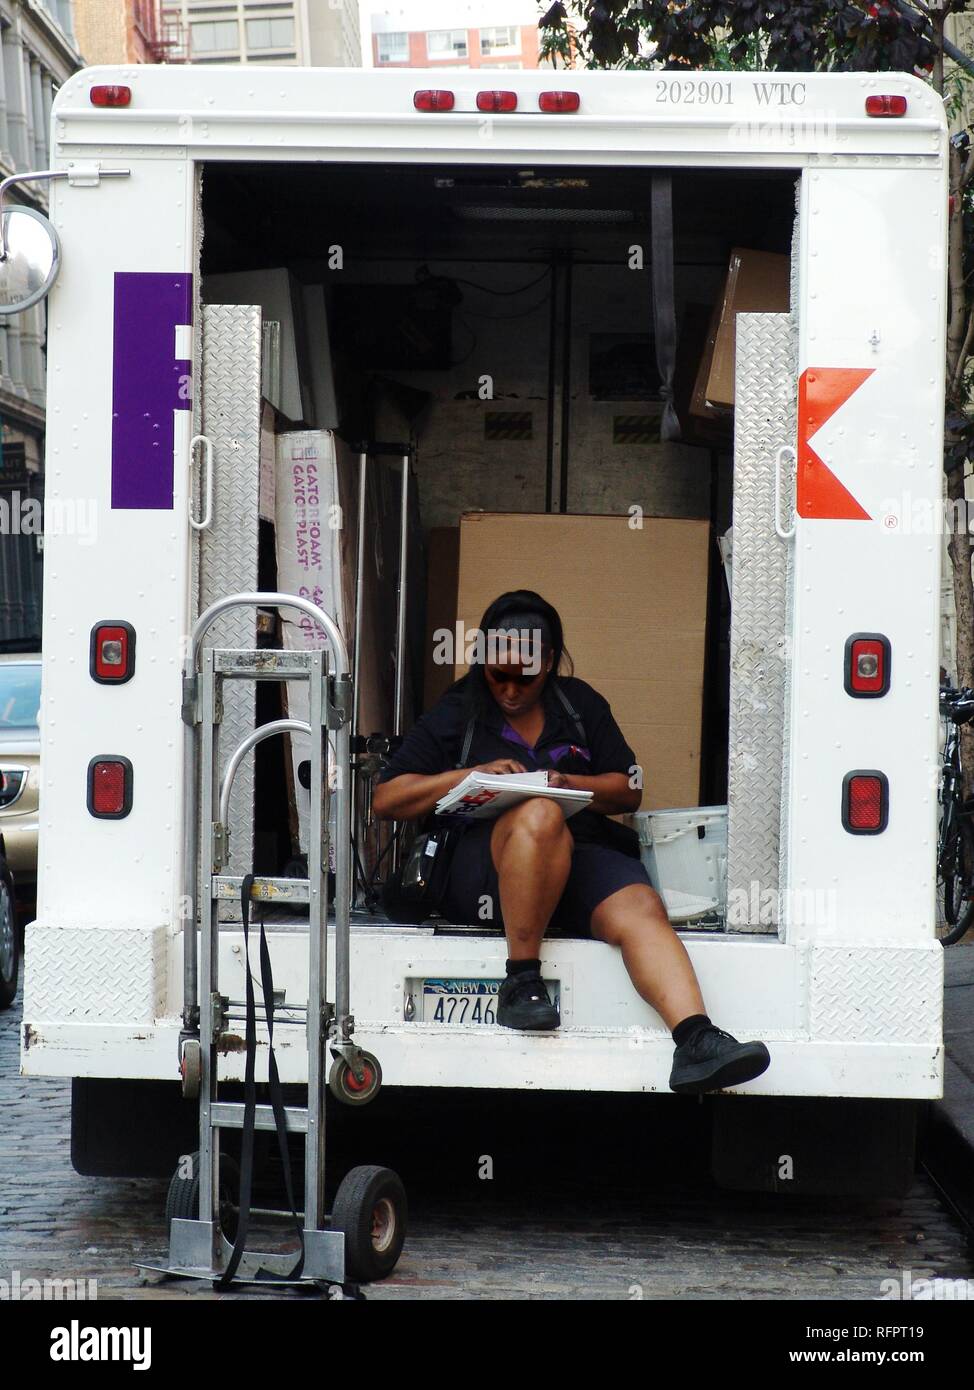 USA, United States of America, New York City: FedEx courier truck in soho. Stock Photo